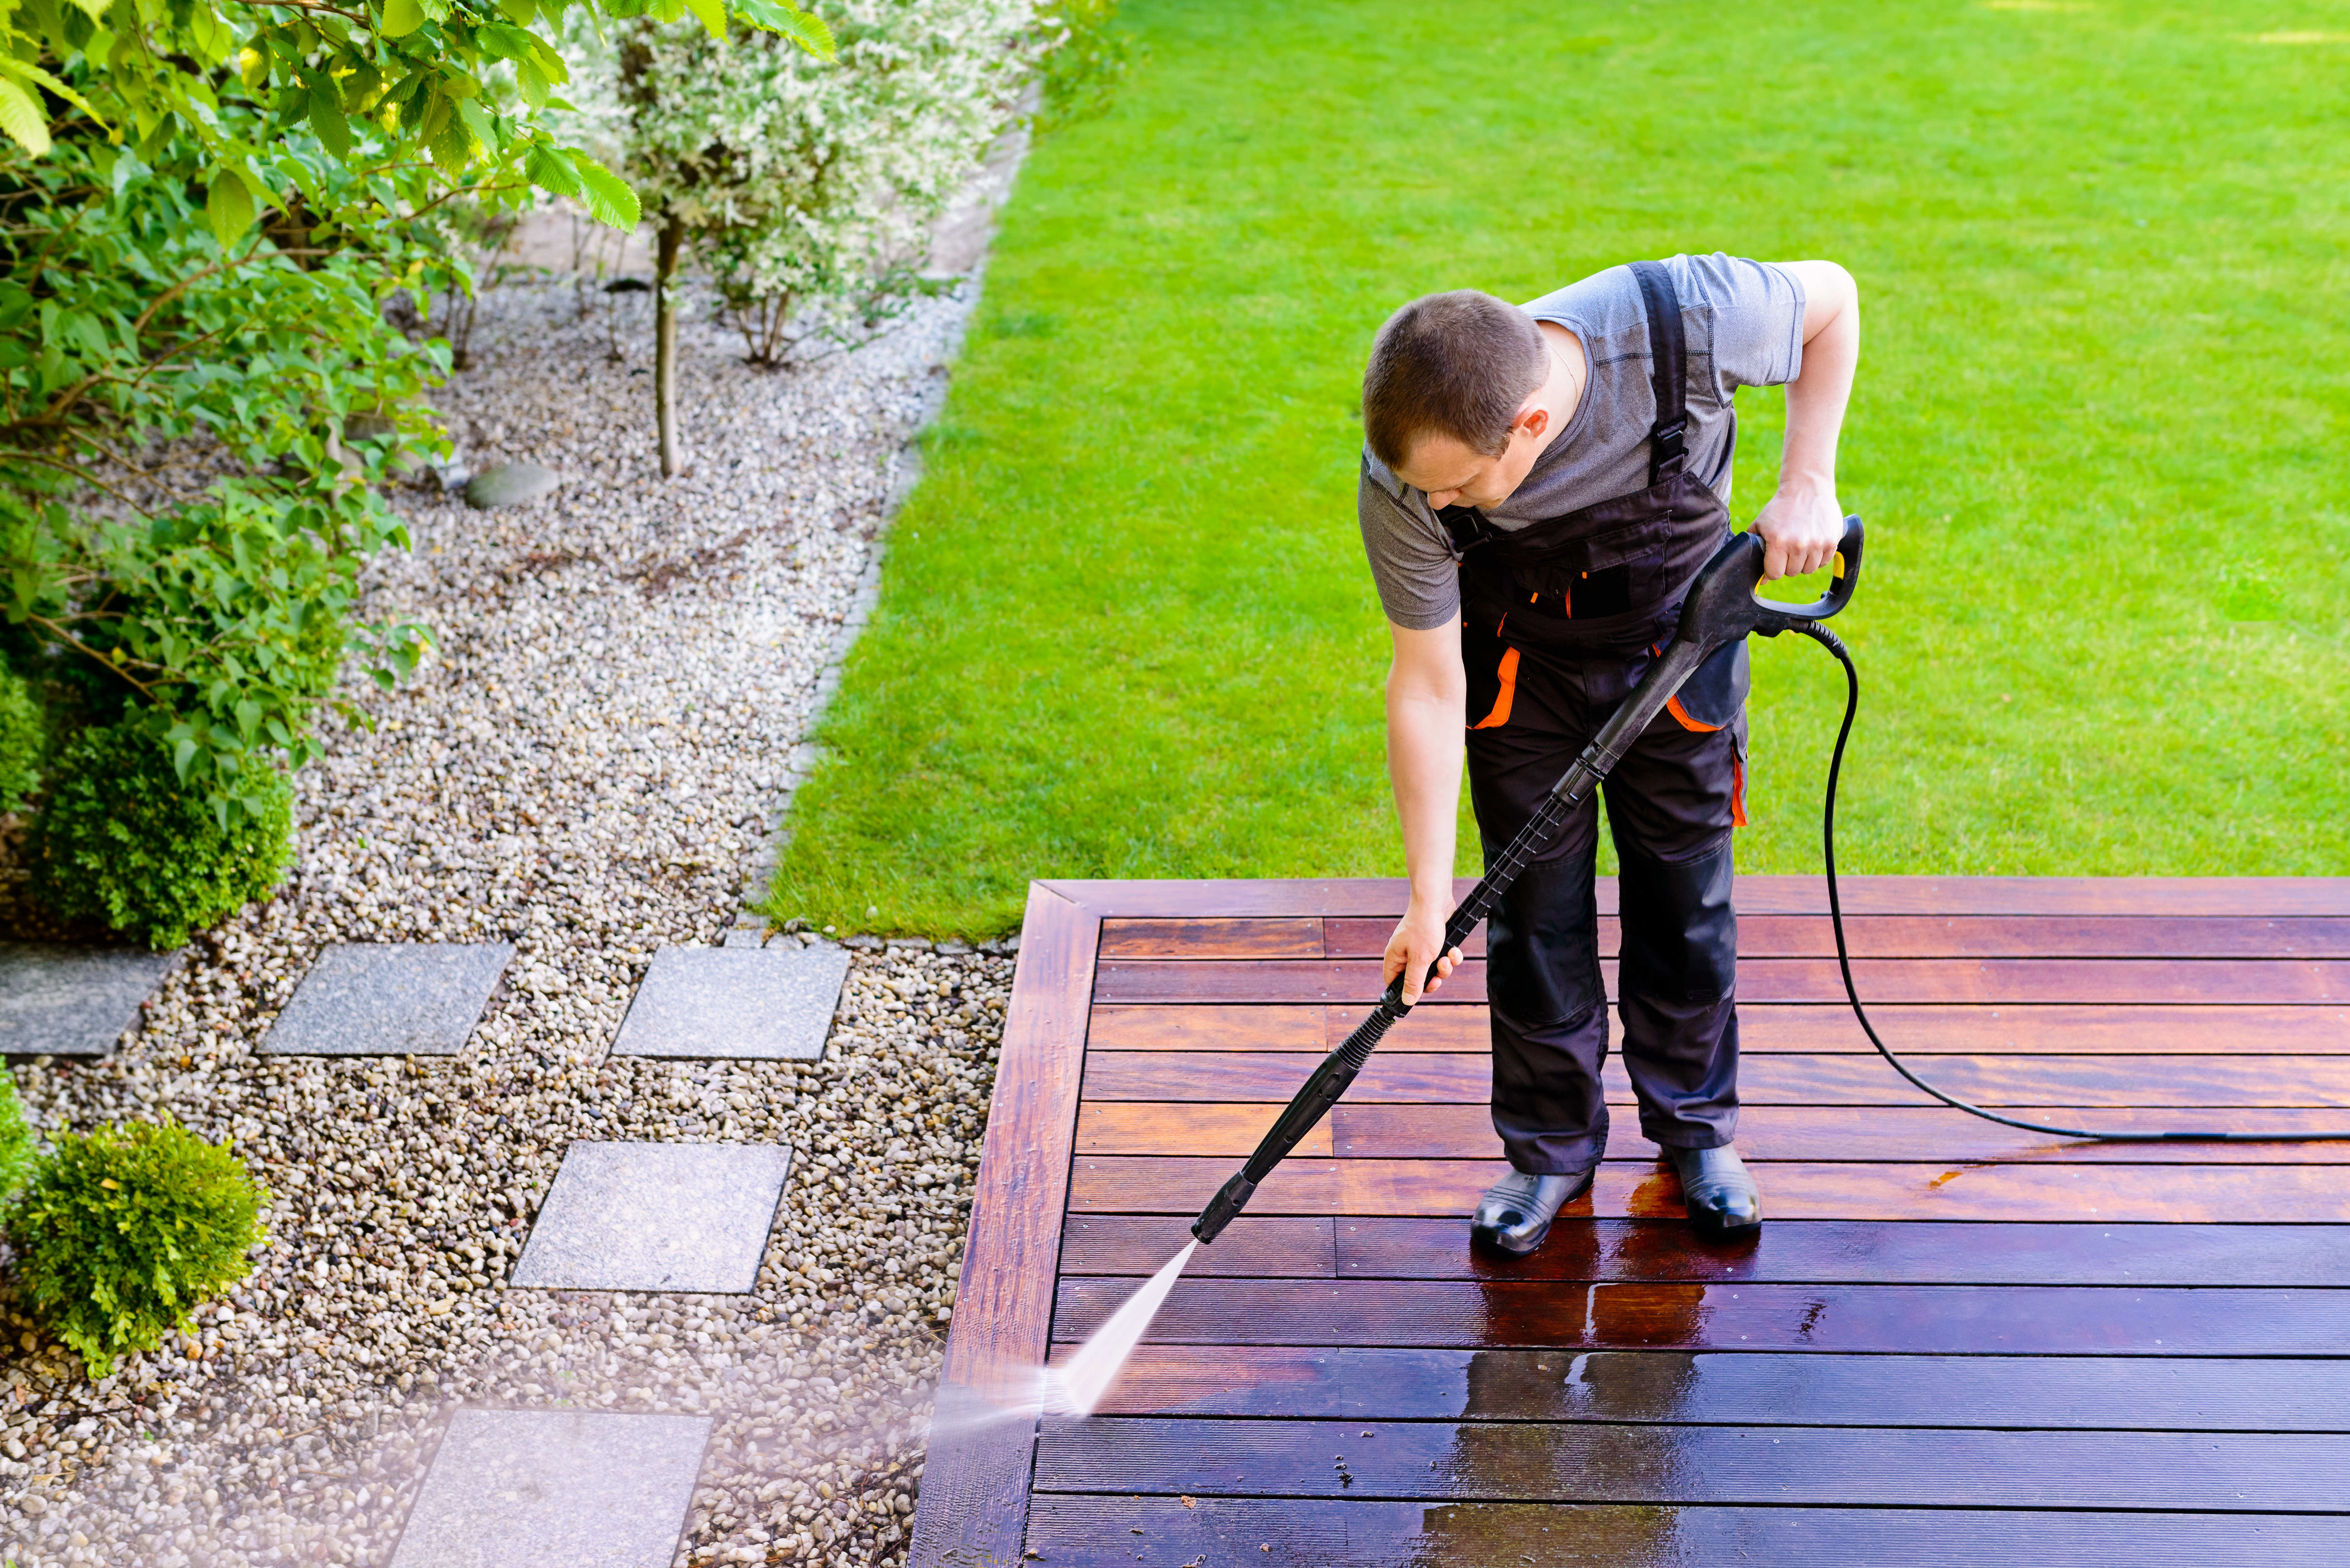 Man using a pressure washer on a wooden patio